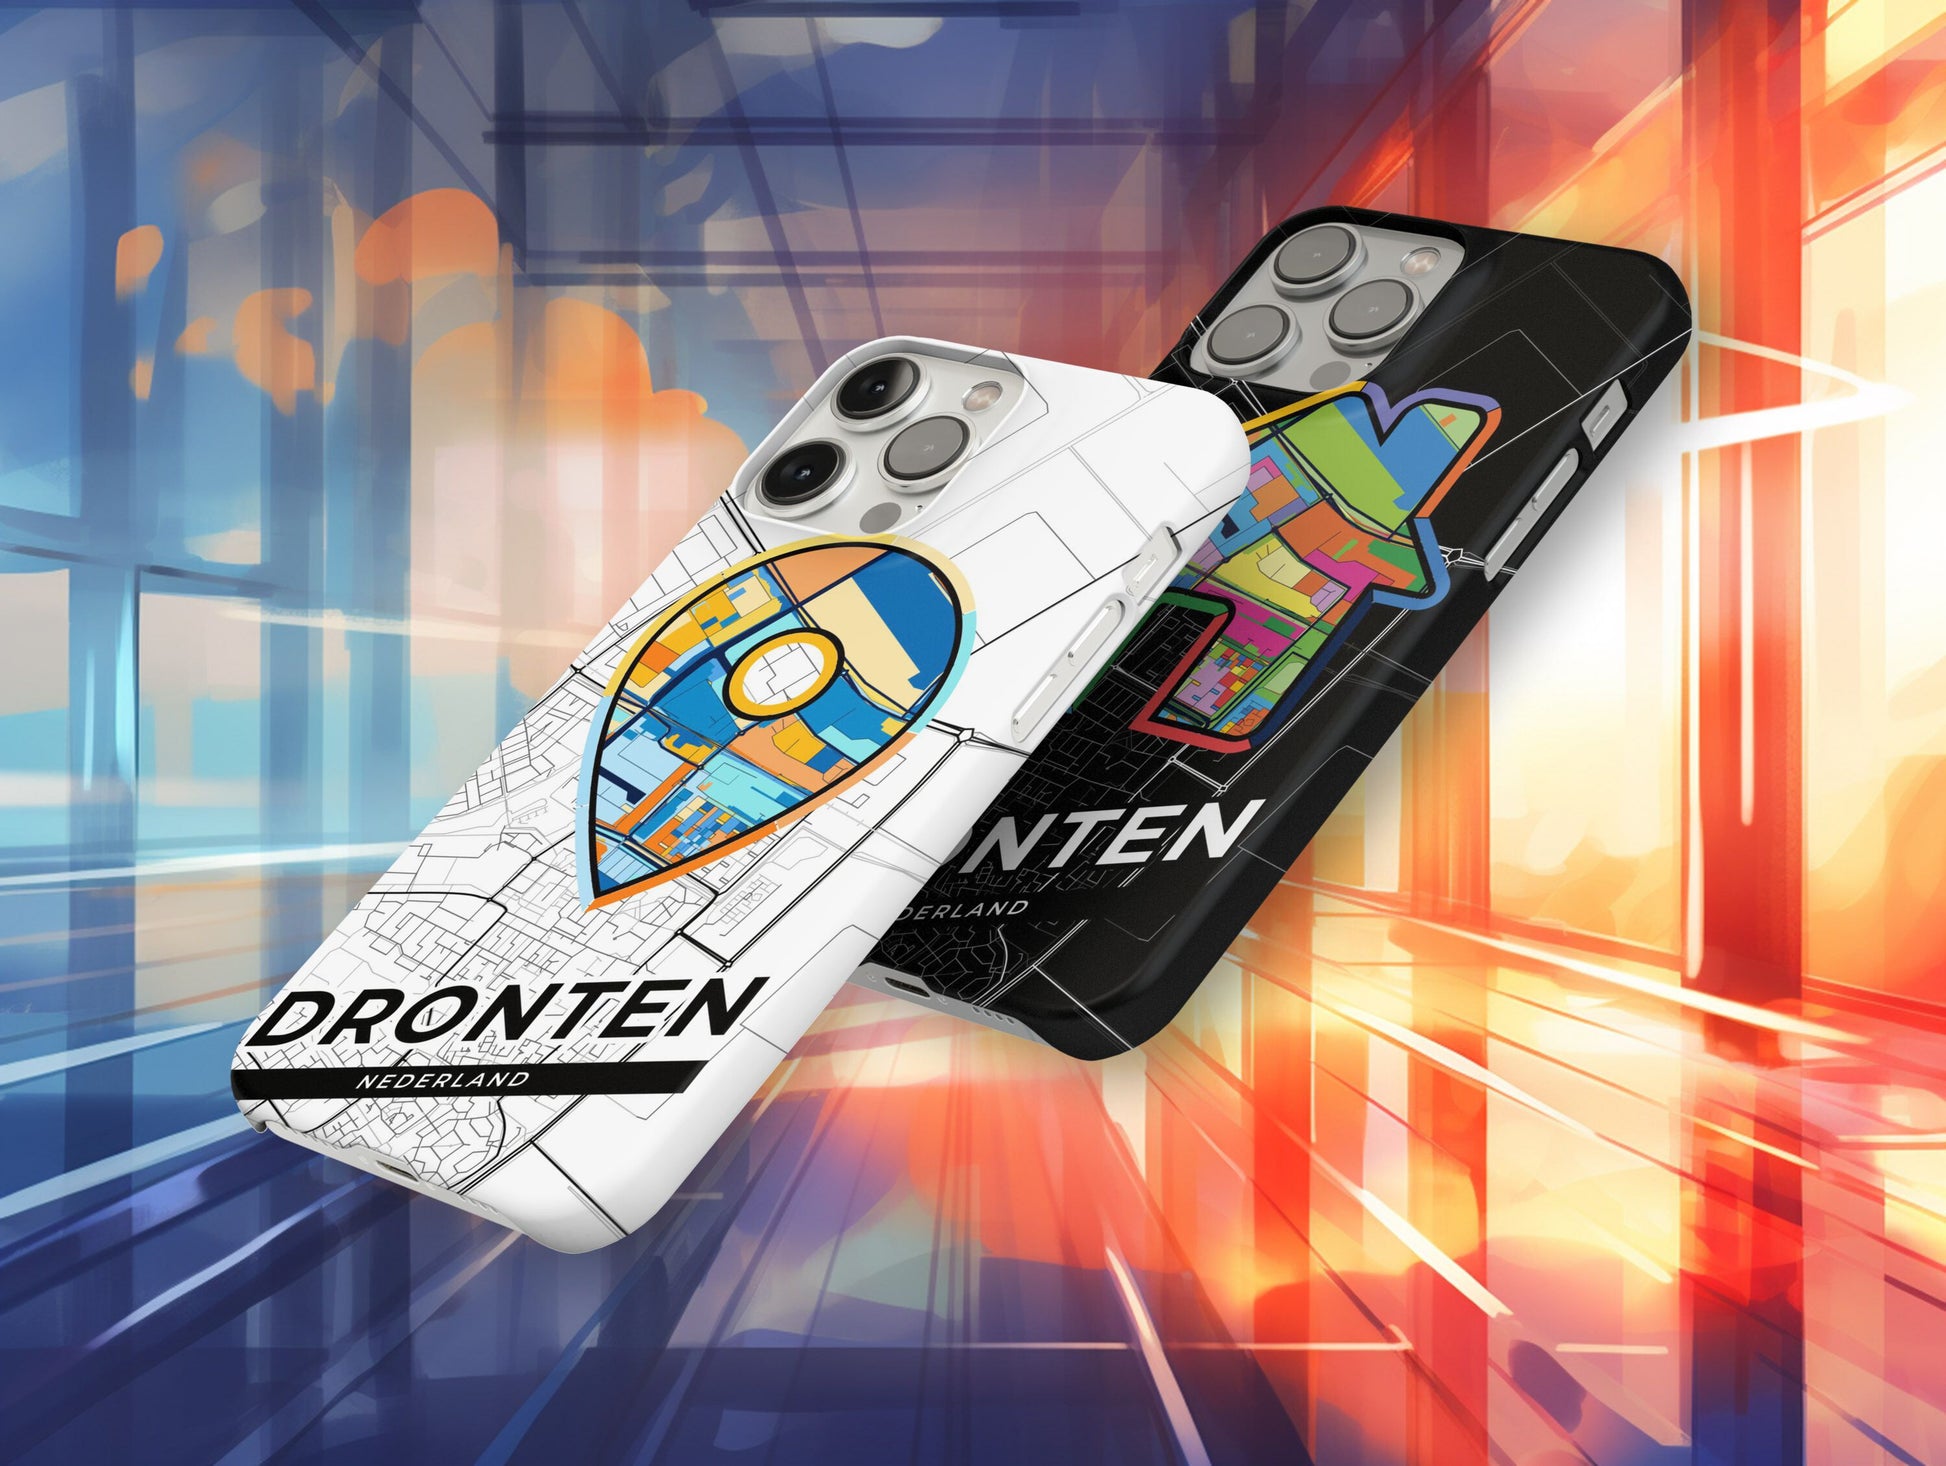 Dronten Netherlands slim phone case with colorful icon. Birthday, wedding or housewarming gift. Couple match cases.